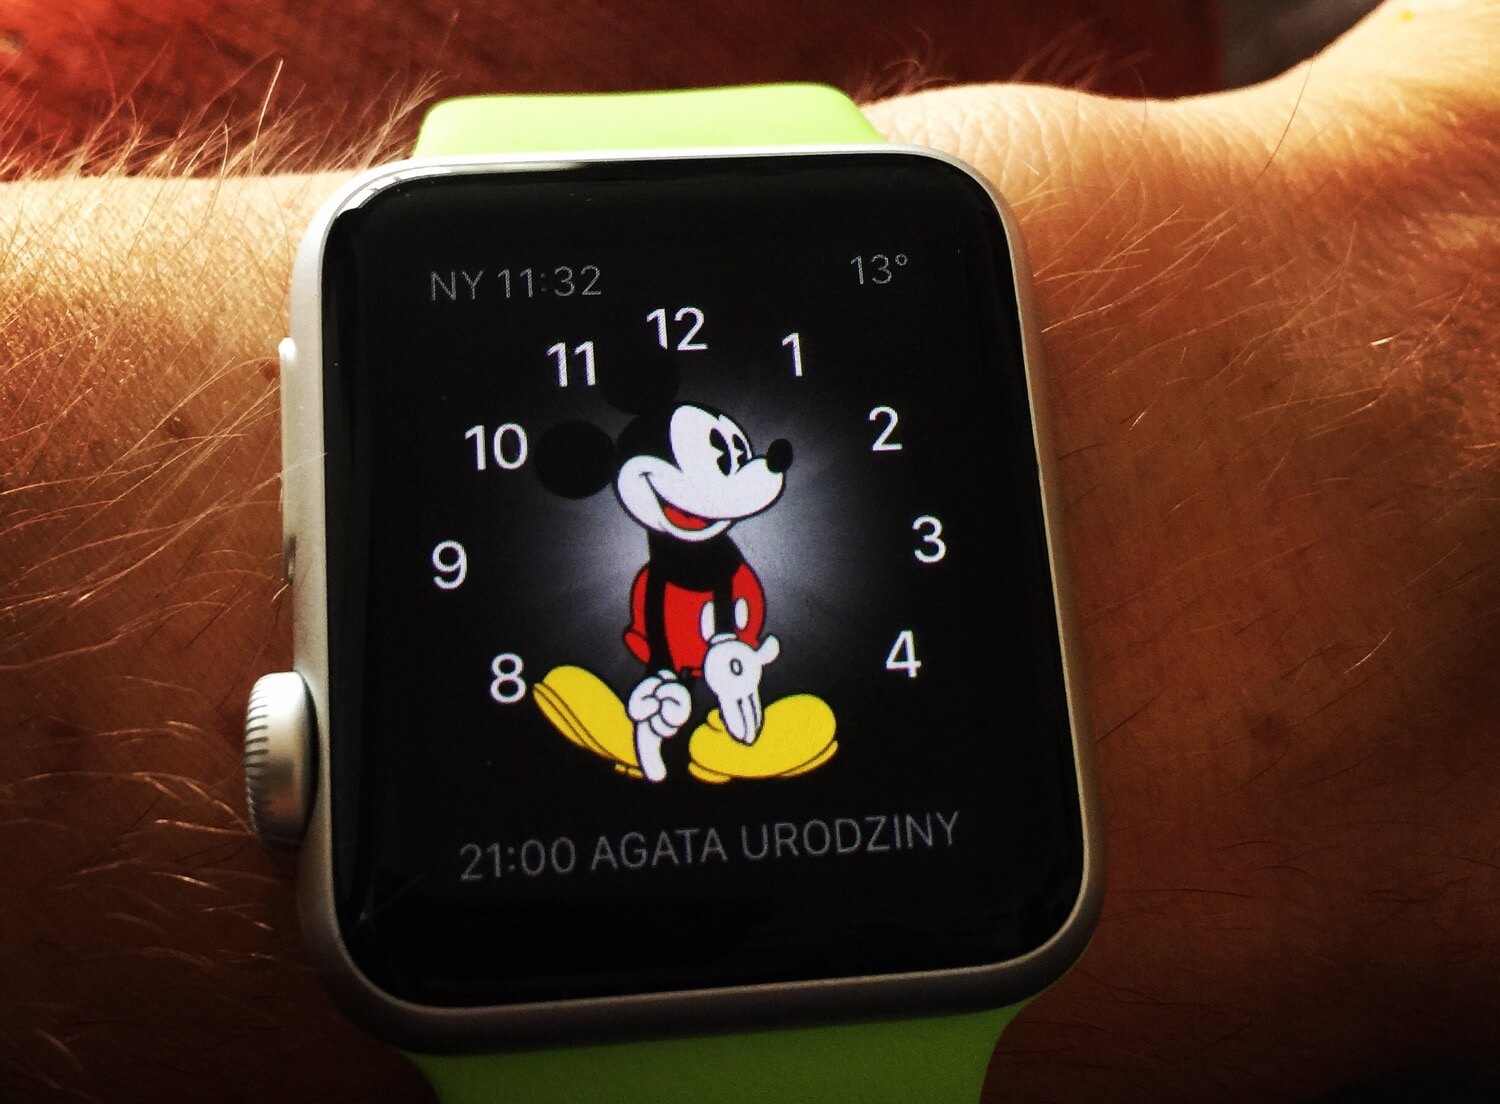 5 days with Apple Watch - time is on my side